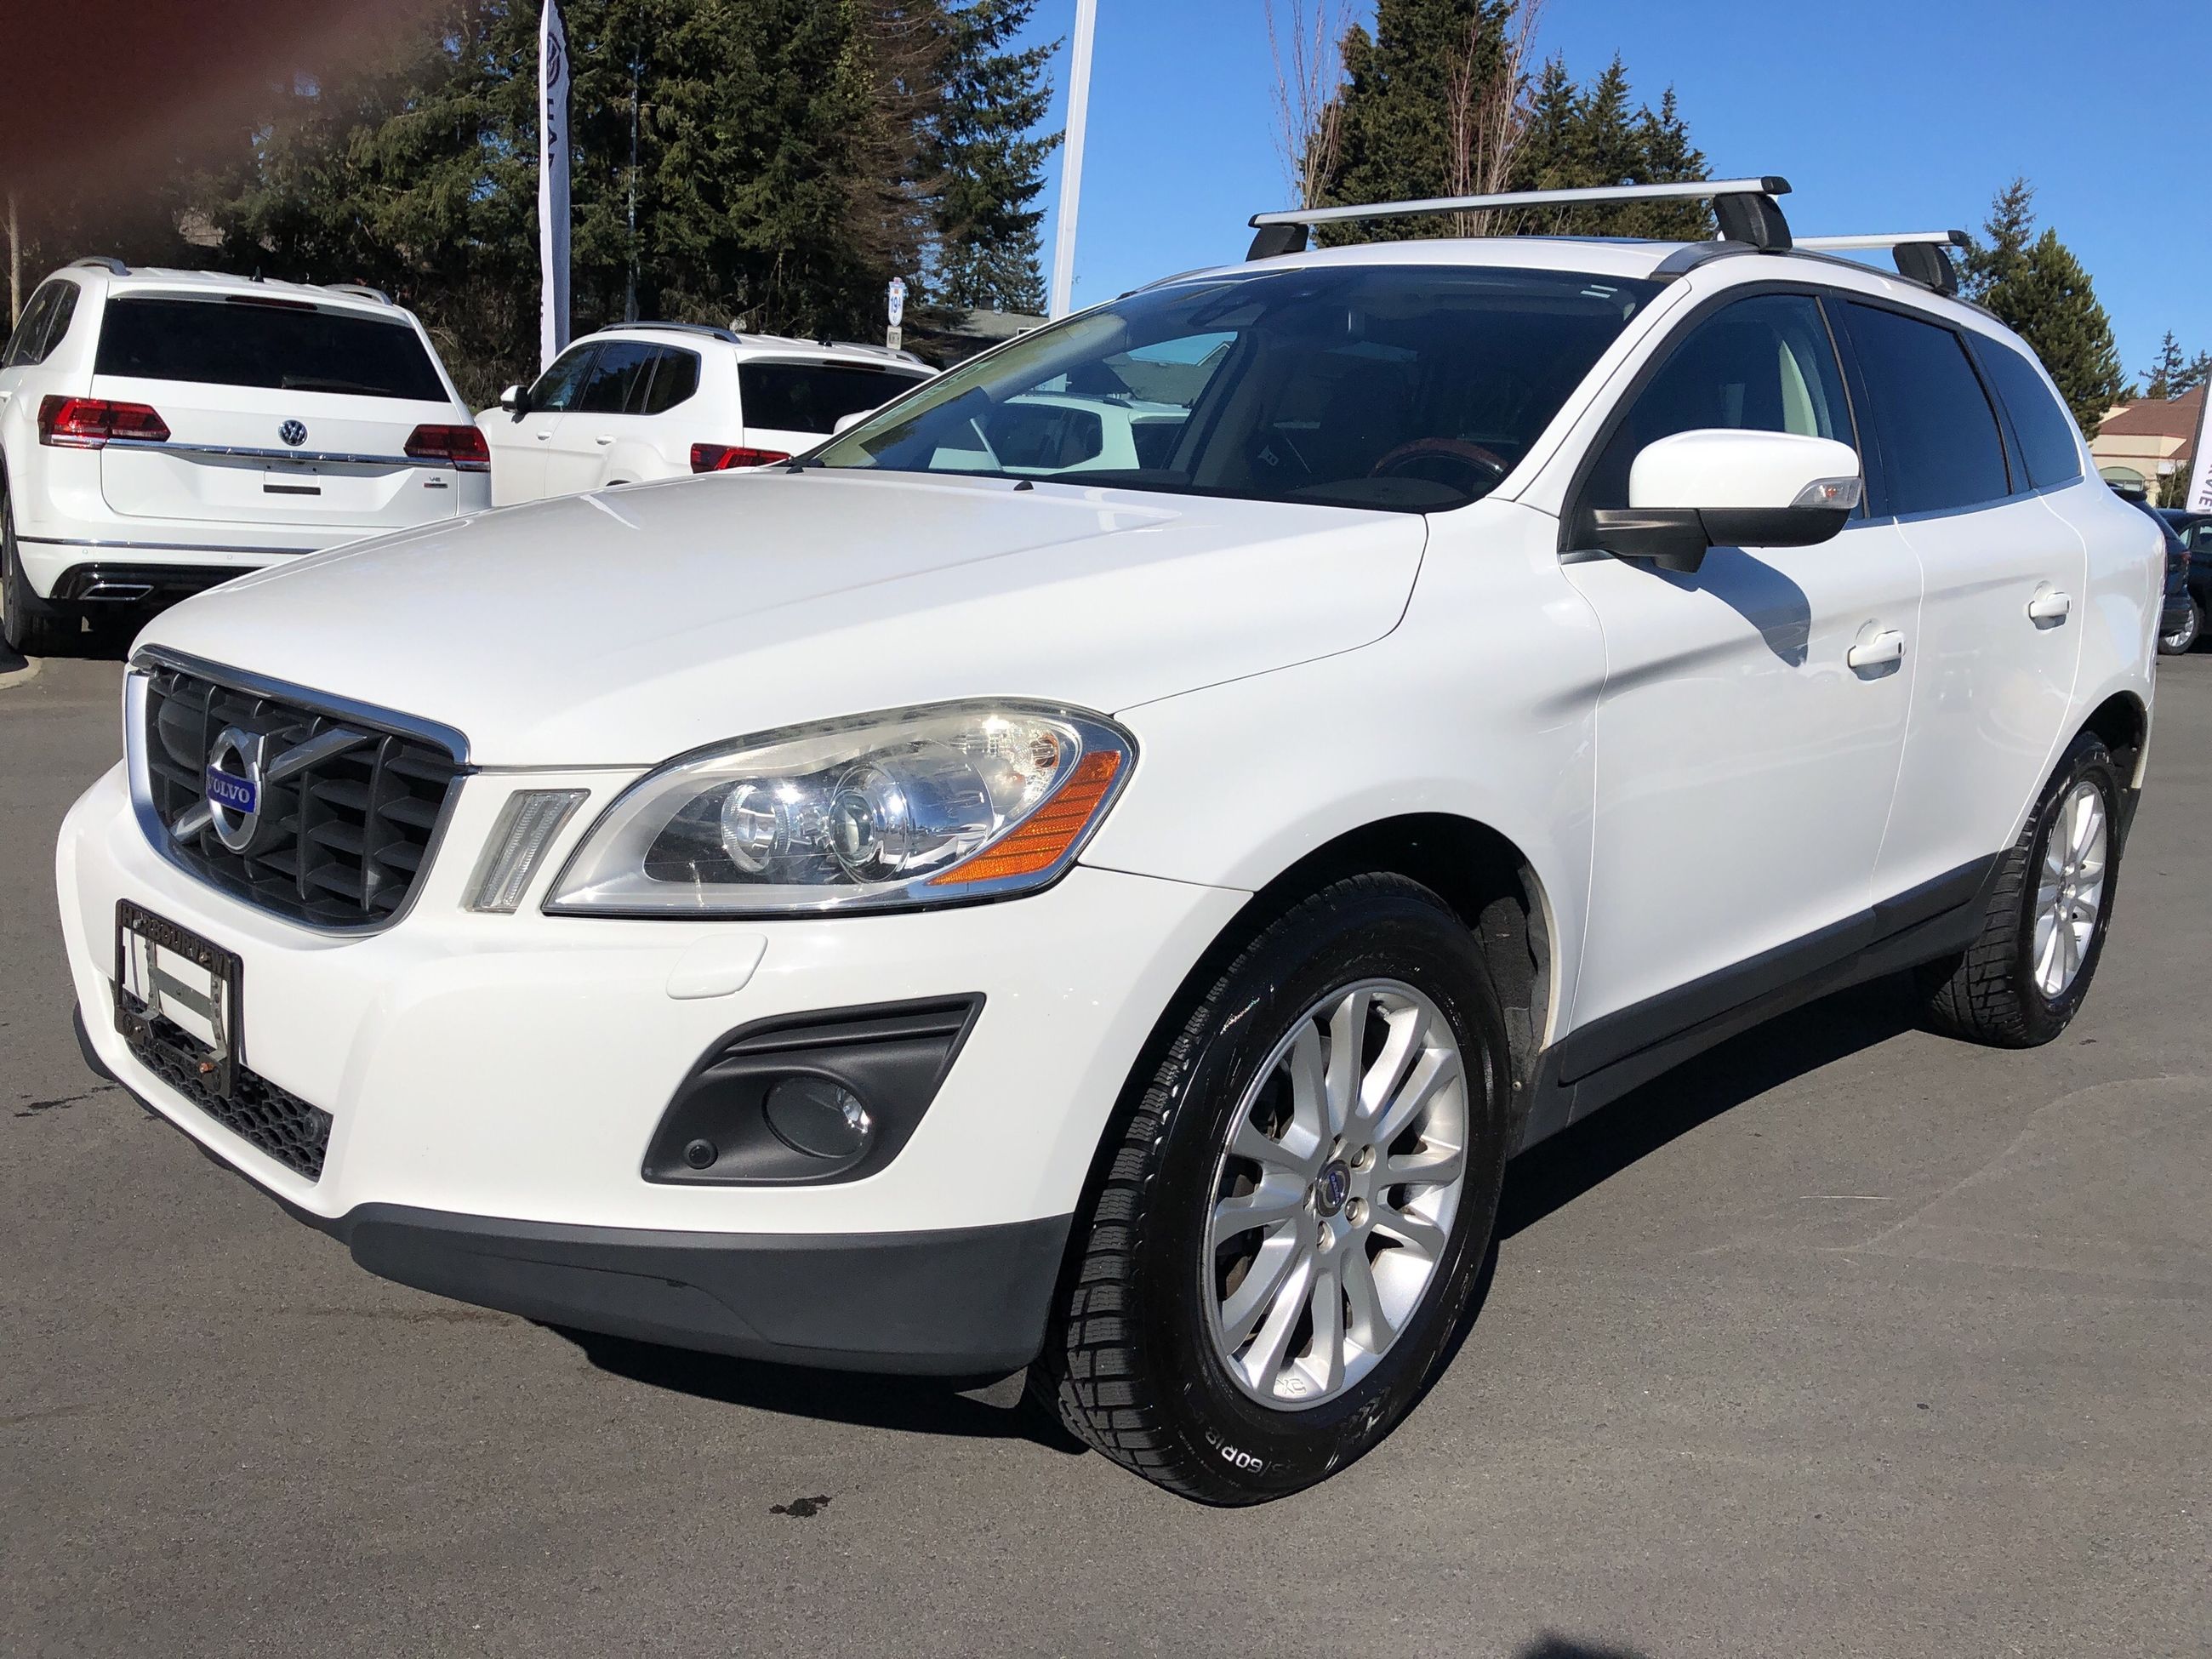 Used 2010 Volvo XC60 T6 AWD for Sale 13995 Harbourview VW